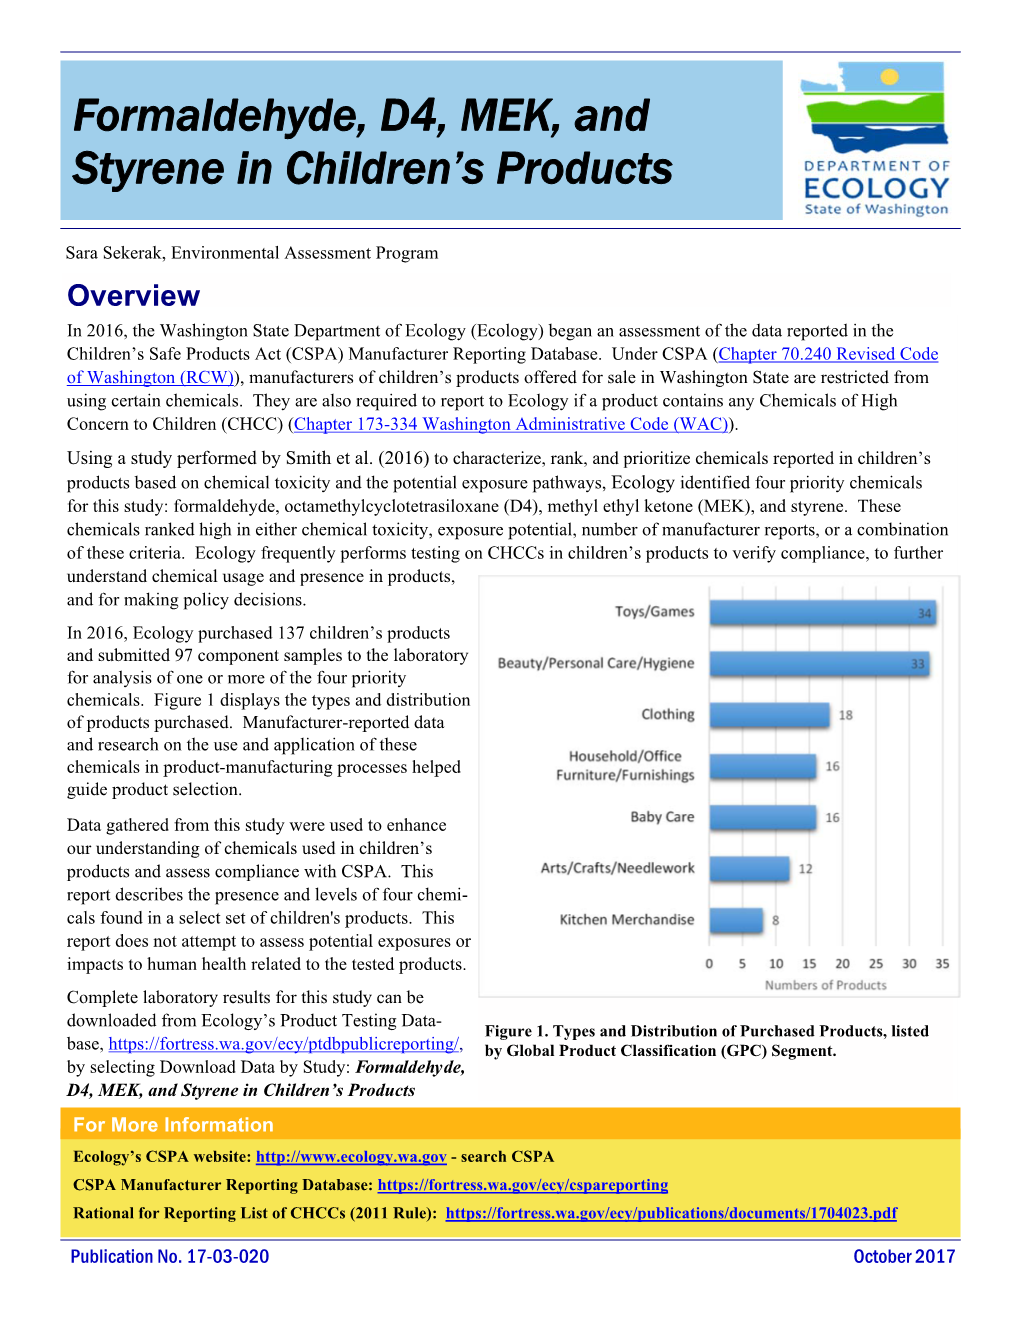 Formaldehyde, D4, MEK, and Styrene in Children's Products